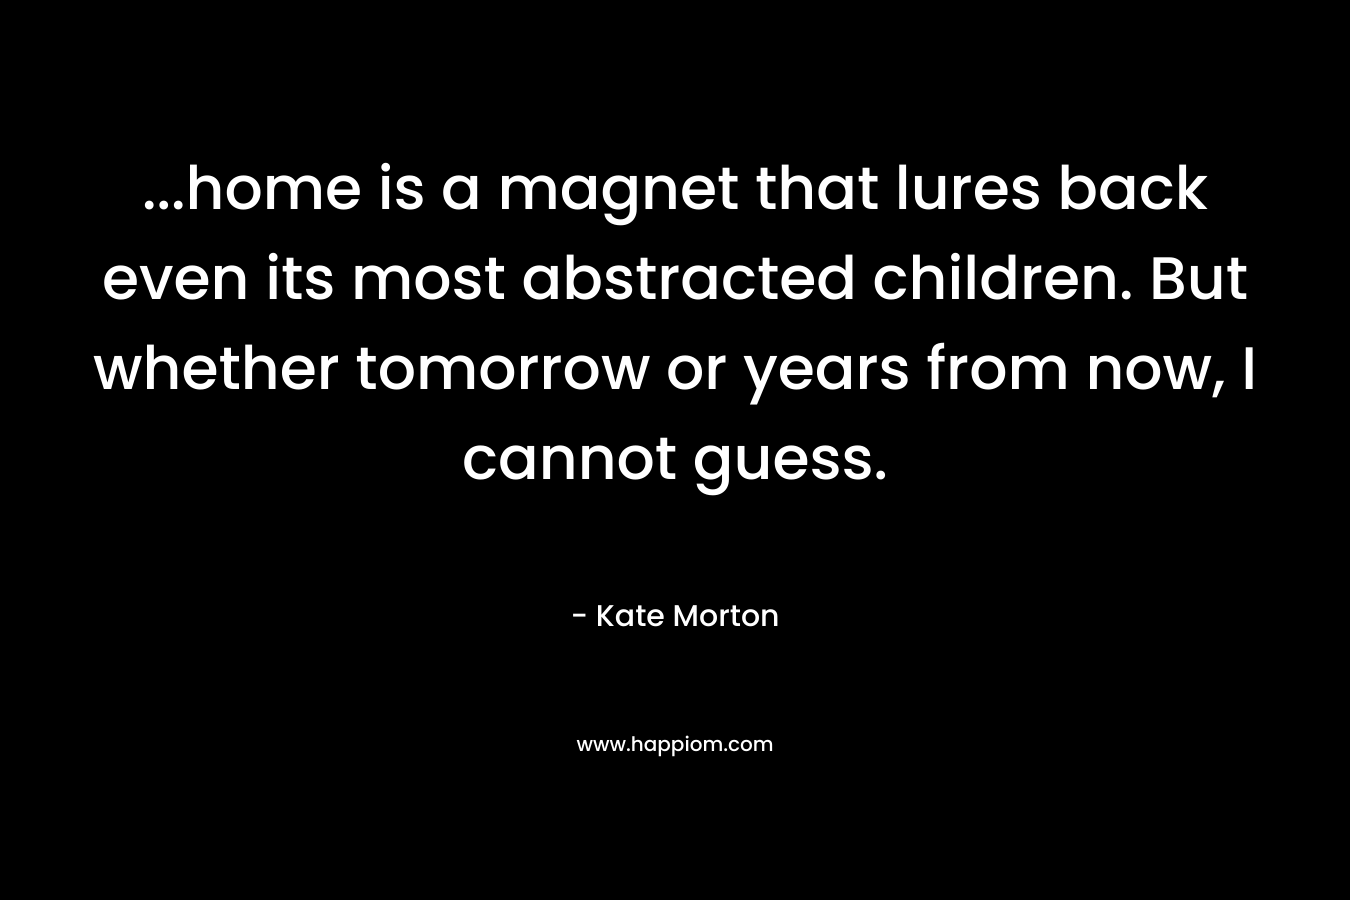 ...home is a magnet that lures back even its most abstracted children. But whether tomorrow or years from now, I cannot guess.